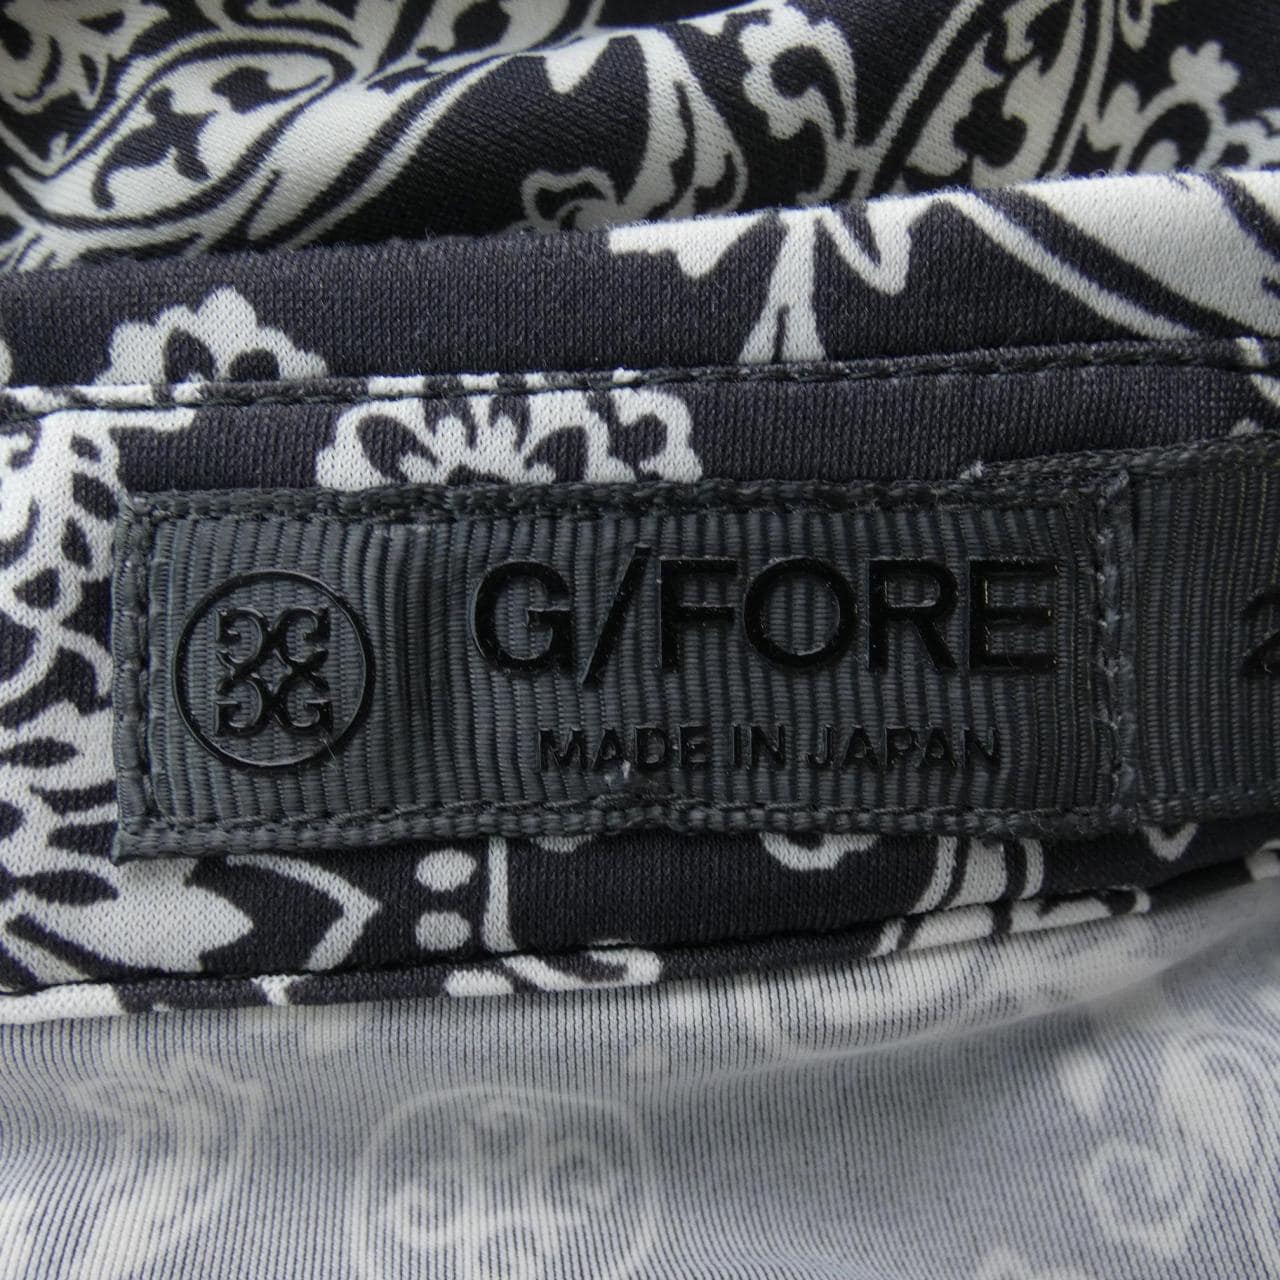 G/FORE POLO衫